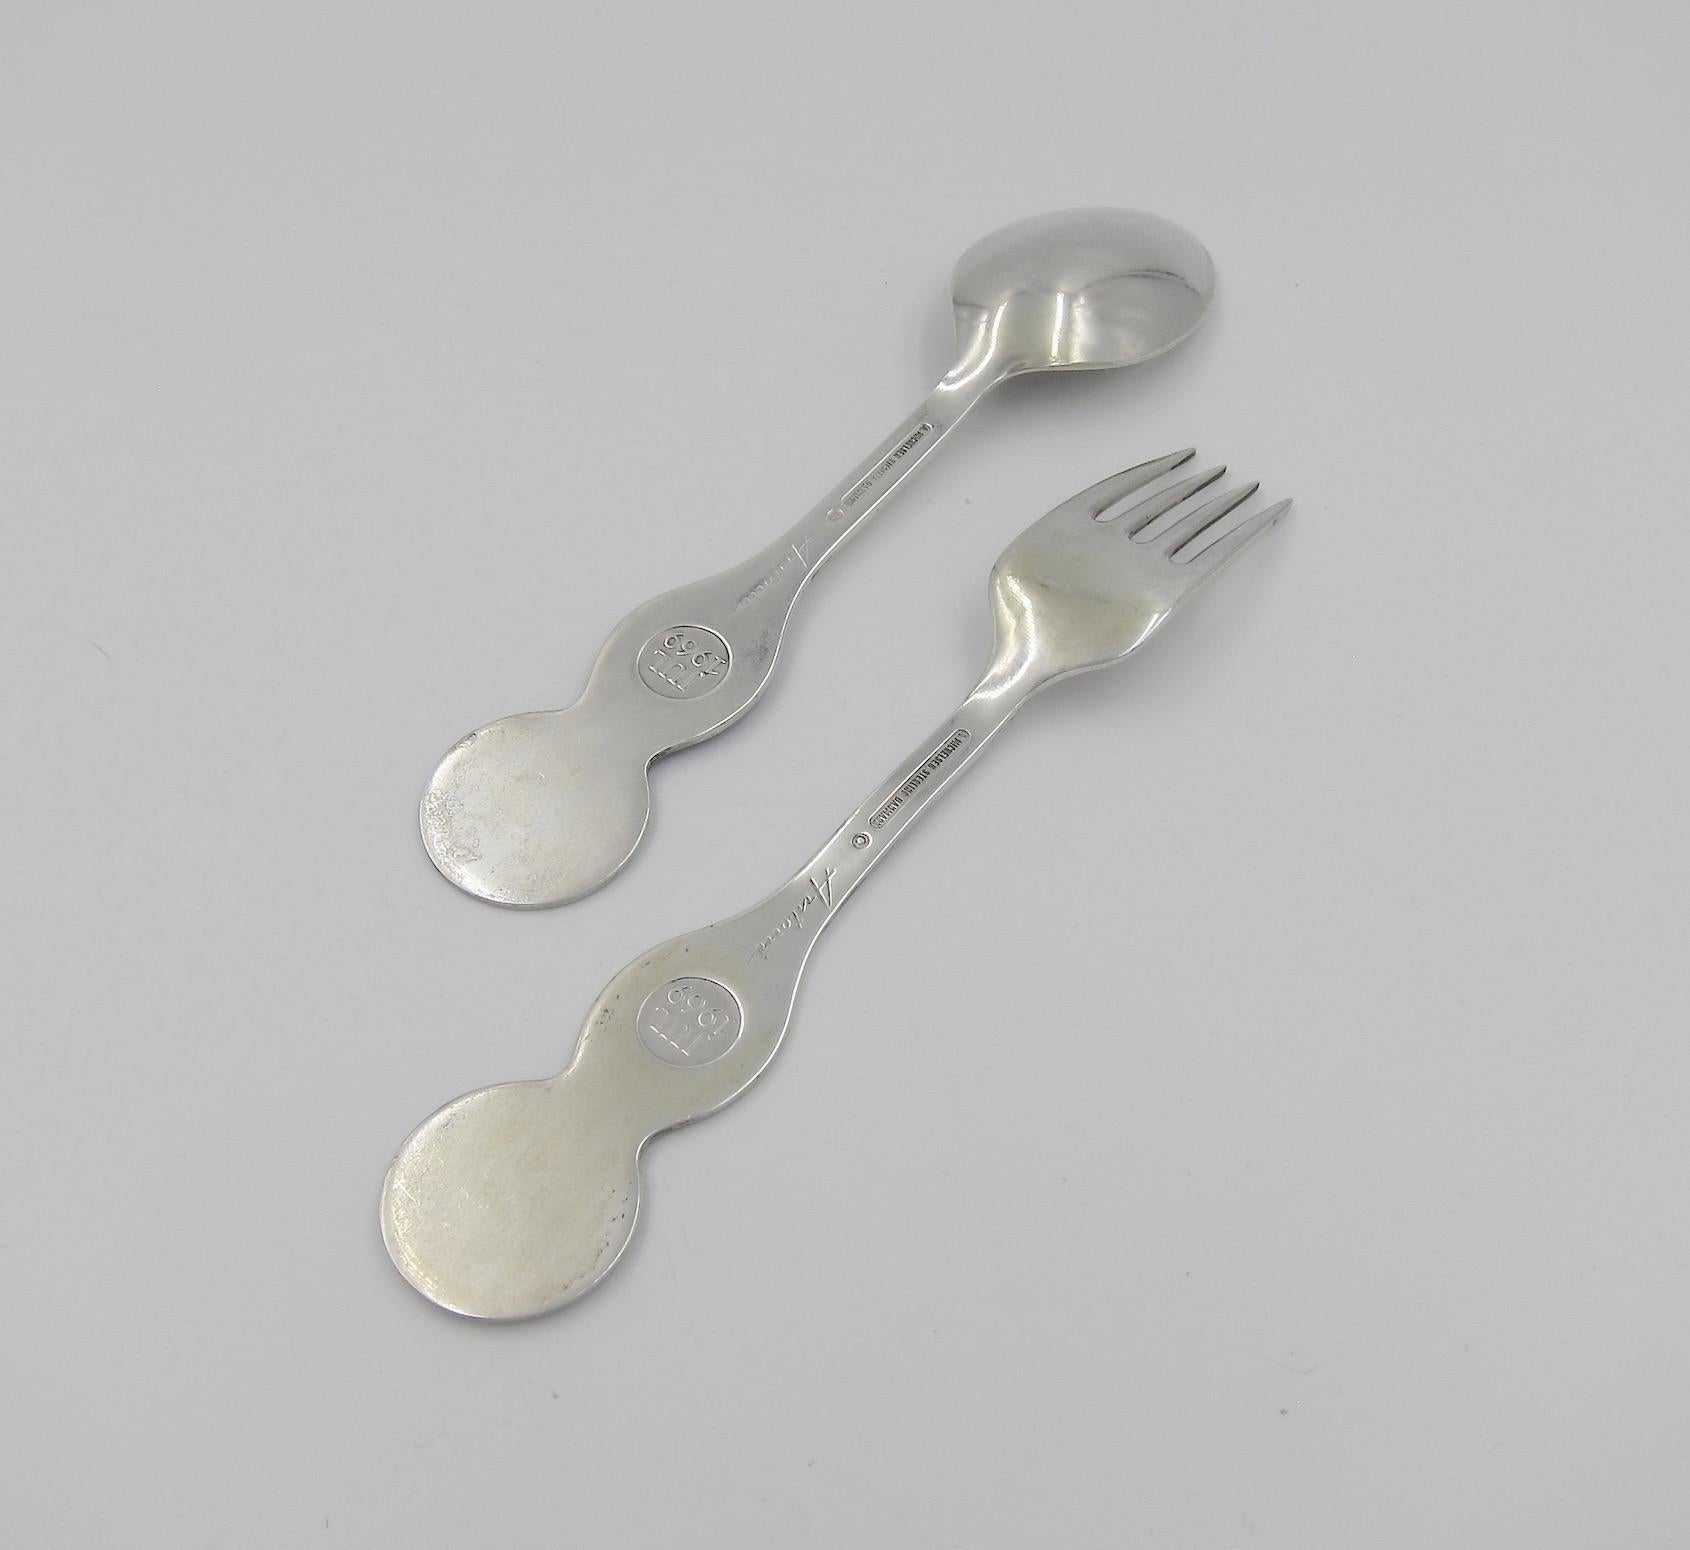 Mid-20th Century 1969 Anton Michelsen Silver and Enamel Greenlander Christmas Fork and Spoon Set